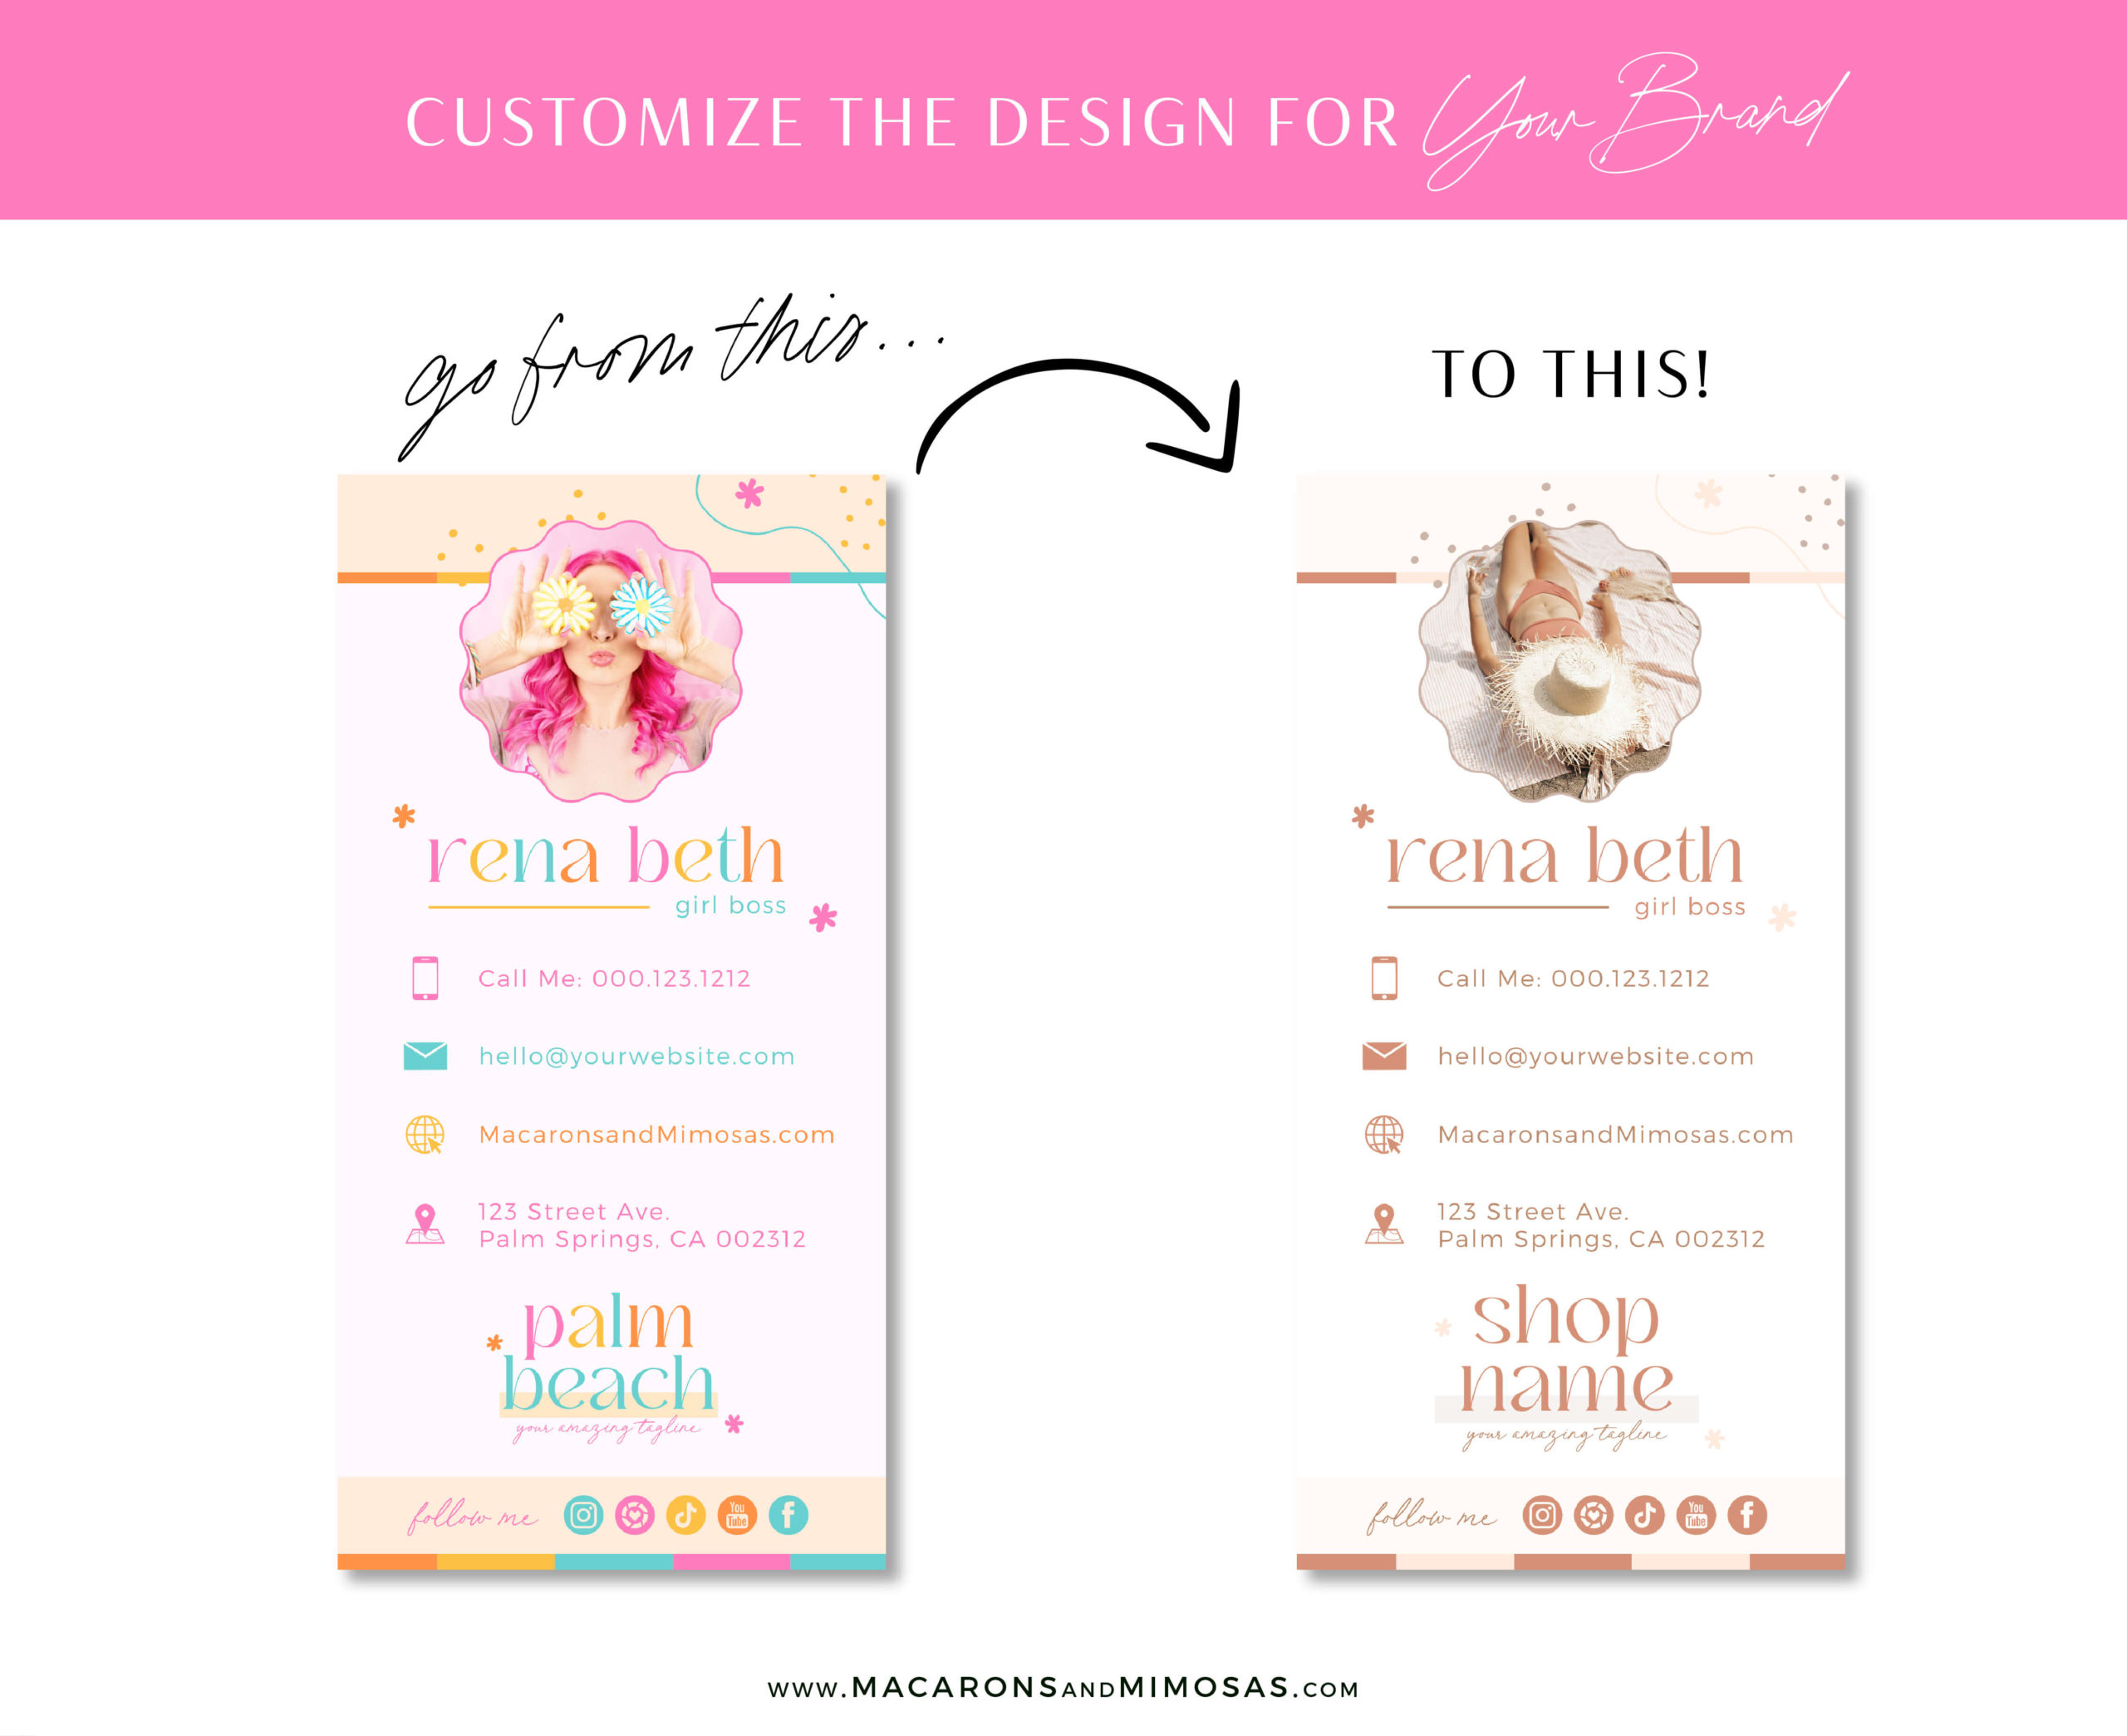 Bright Retro Digital Business Card Template editable in Canva with clickable links, DIY Flower Child Retro Bright Colorful Coach Digital Business Card